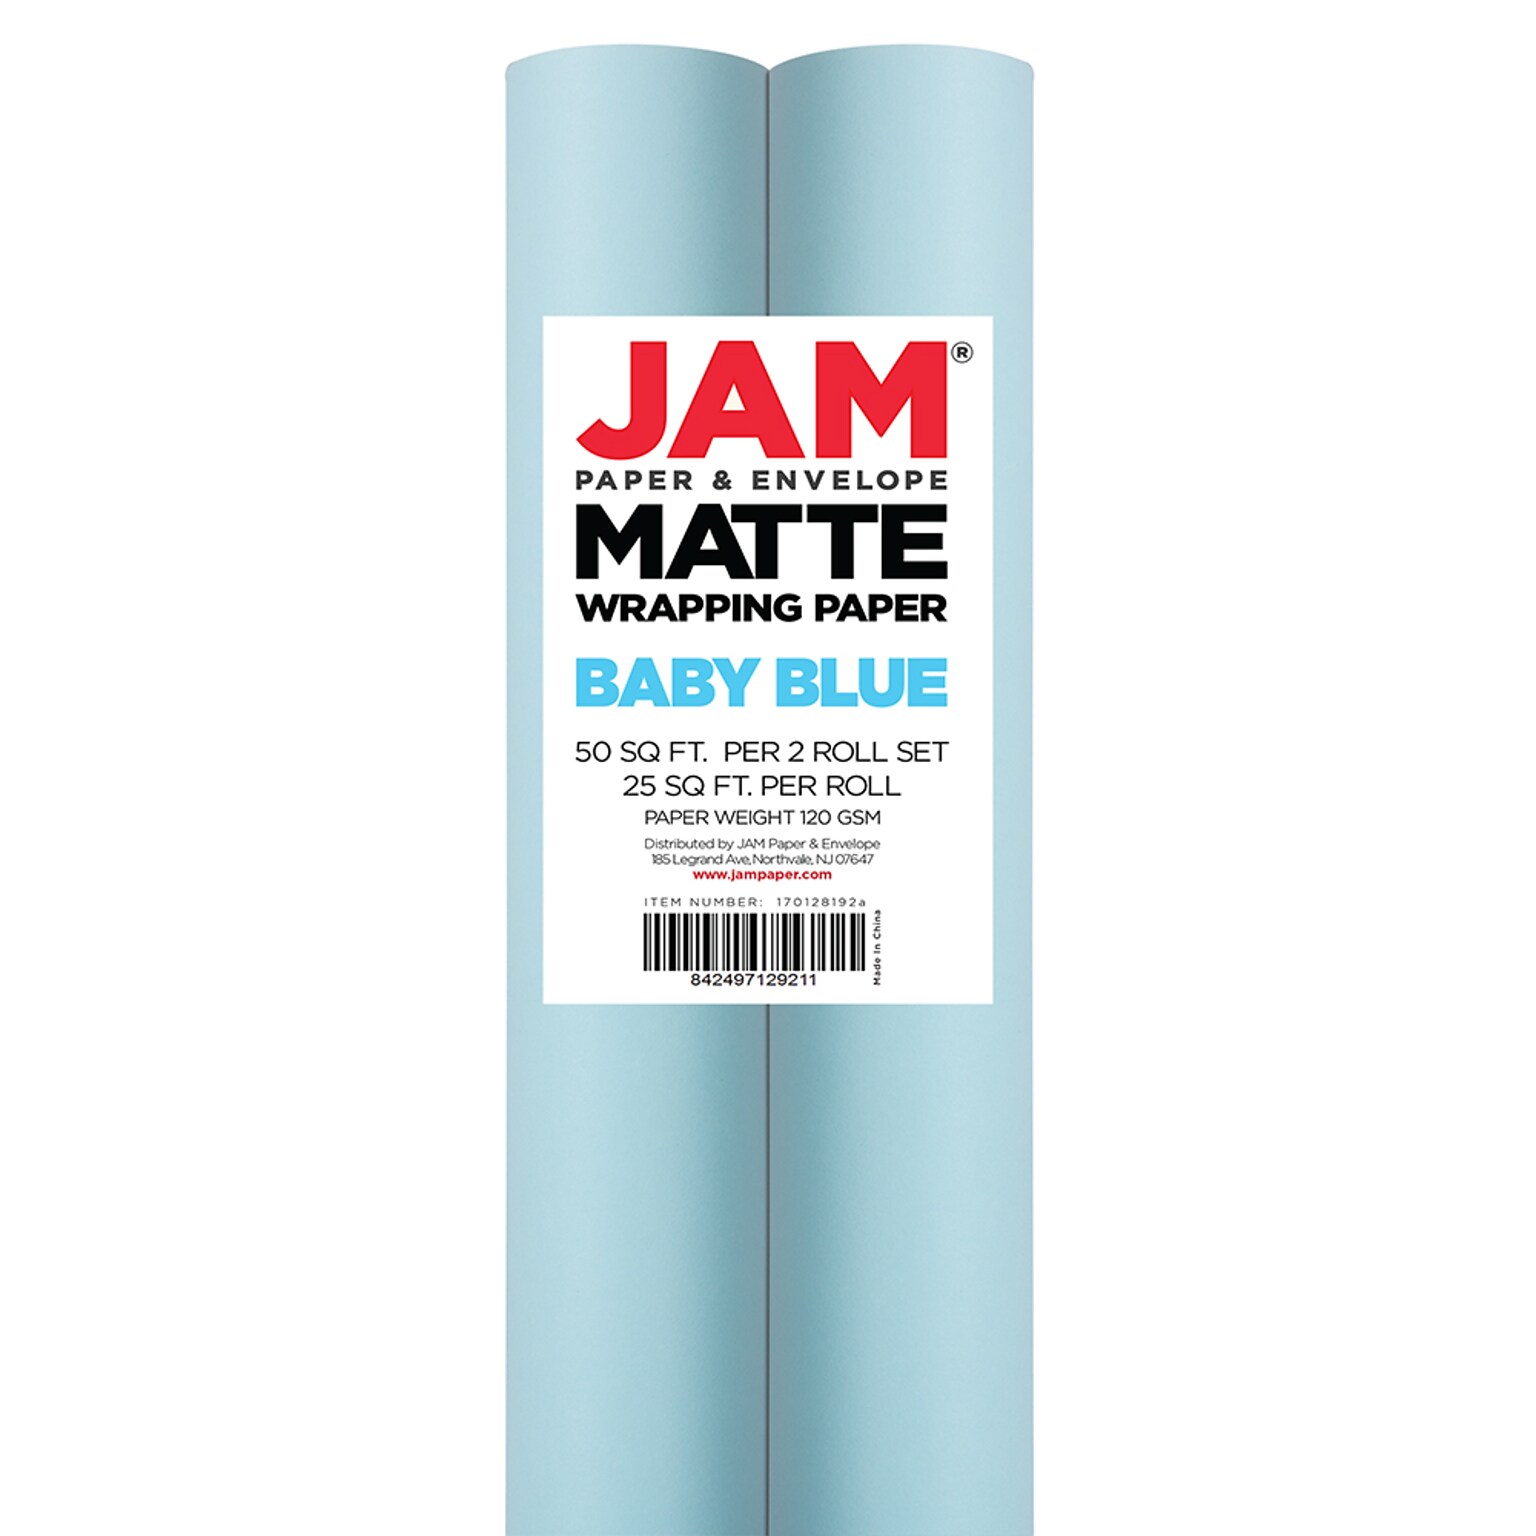 JAM PAPER Gift Wrap, Matte Wrapping Paper, 25 Sq Ft per Roll, Matte Light Baby Blue/Pool Blue, 2/Pack